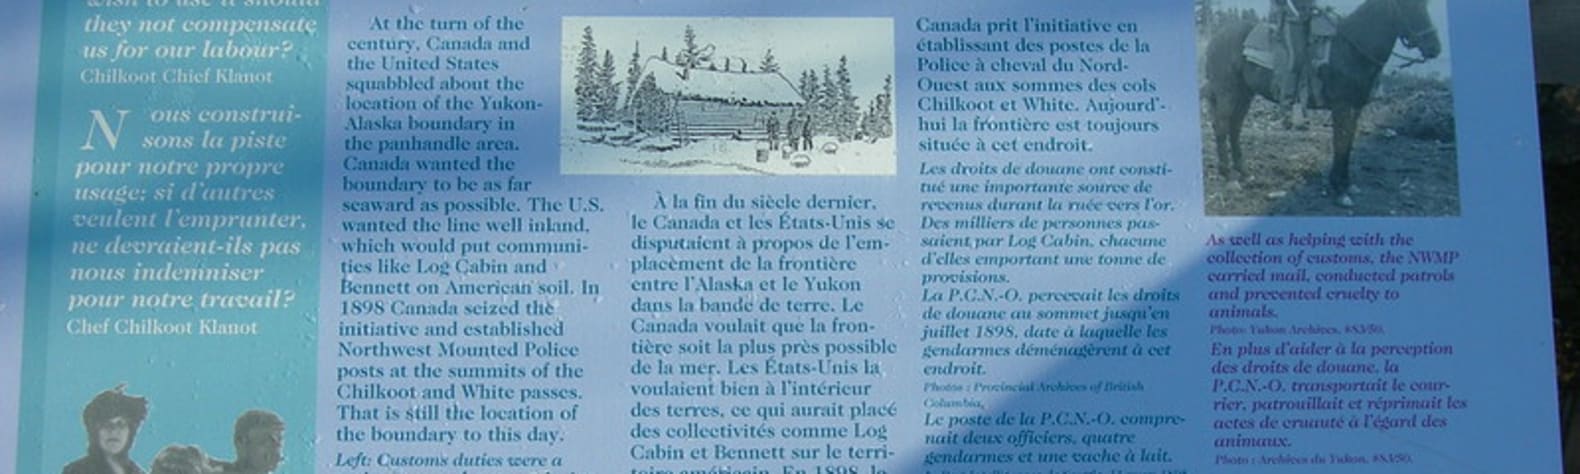 Chilkoot Trail National Historic Site